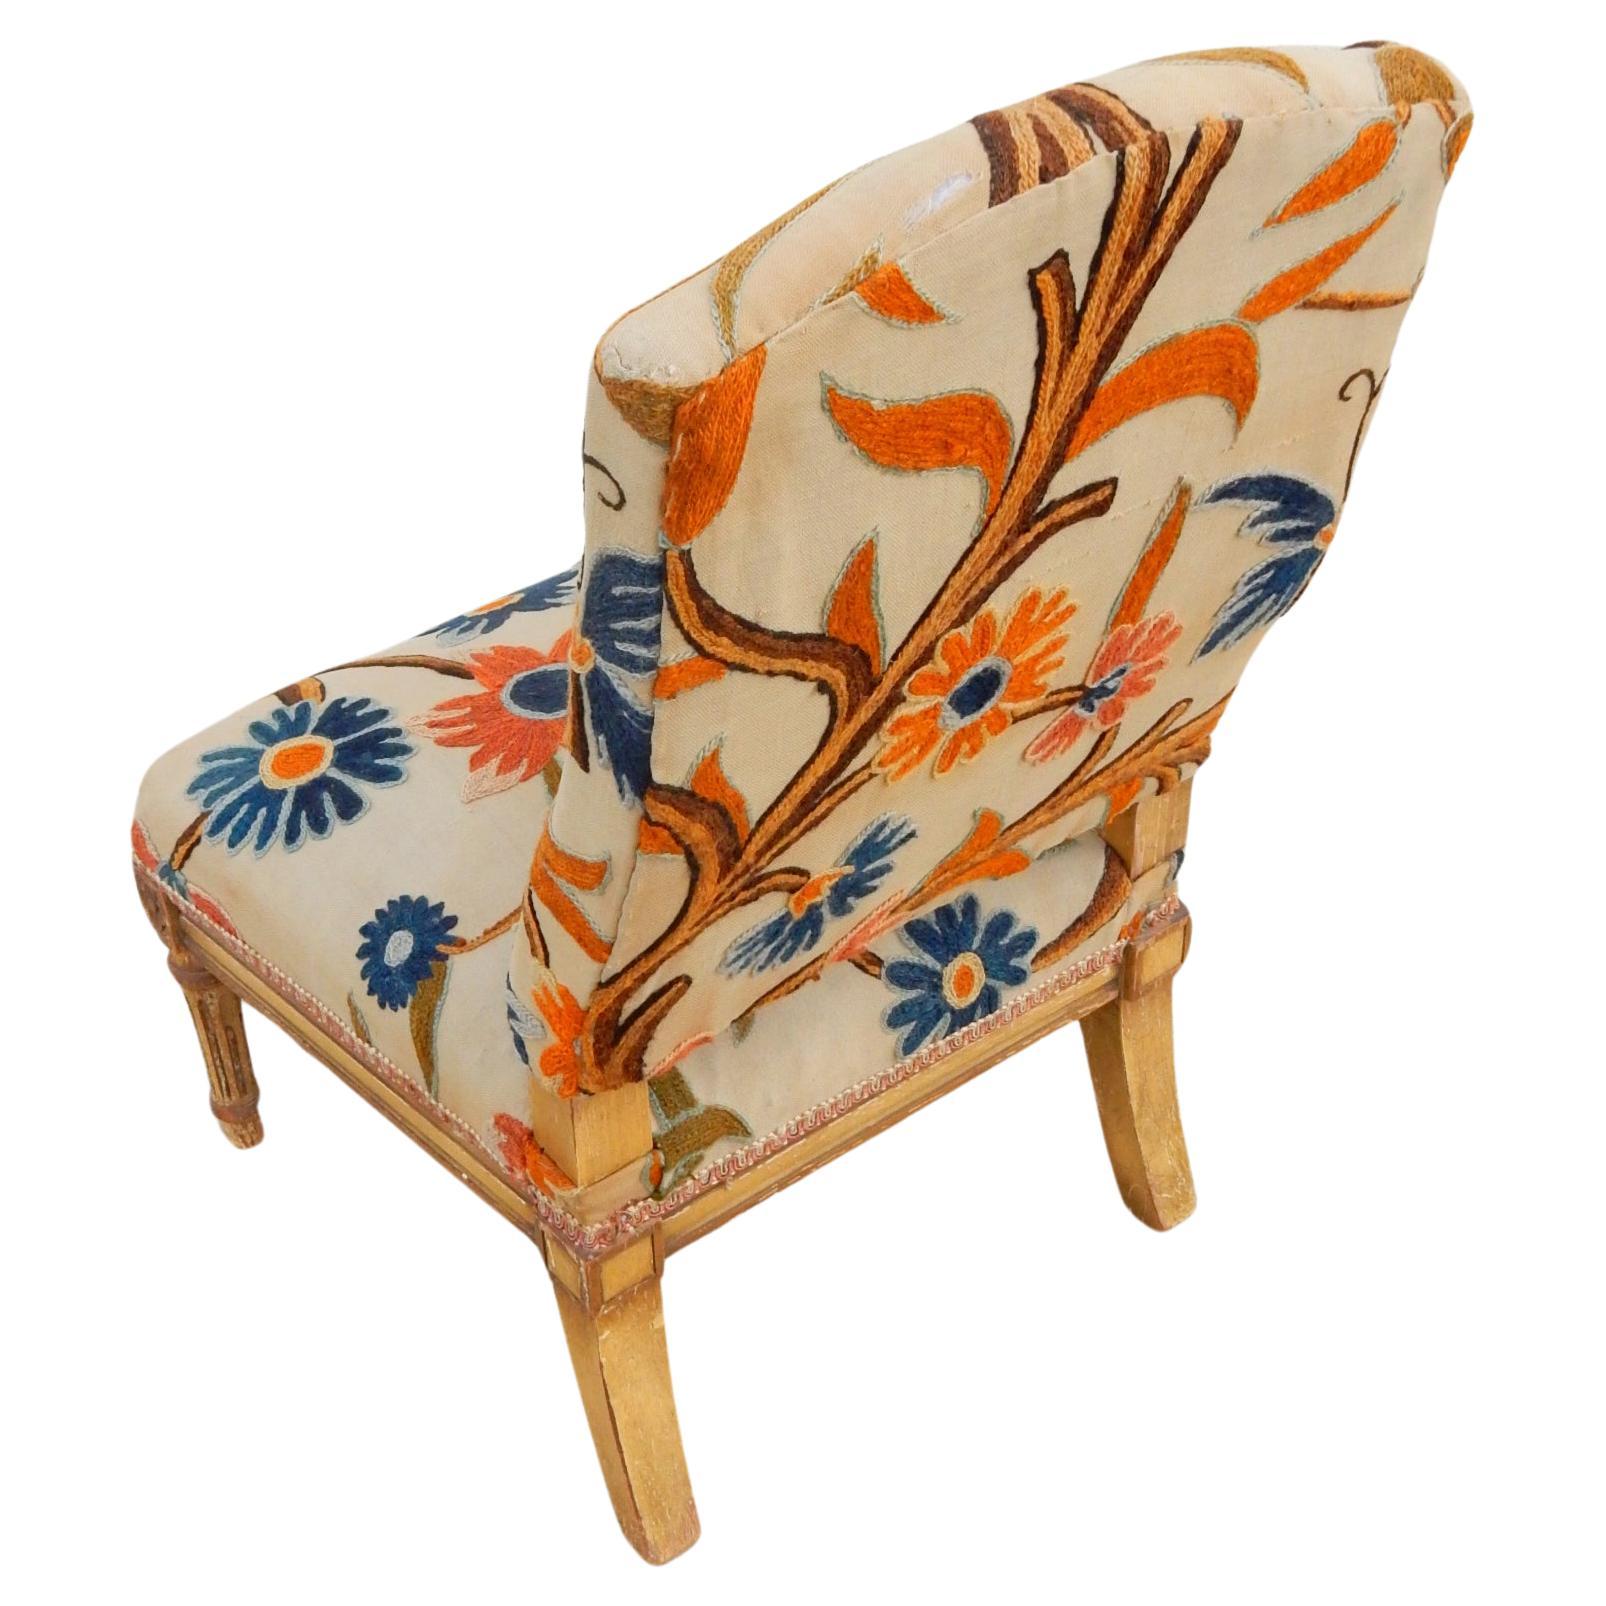 Louis XVI Child's Chair in Crewelwork Upholstery In Good Condition For Sale In Las Vegas, NV